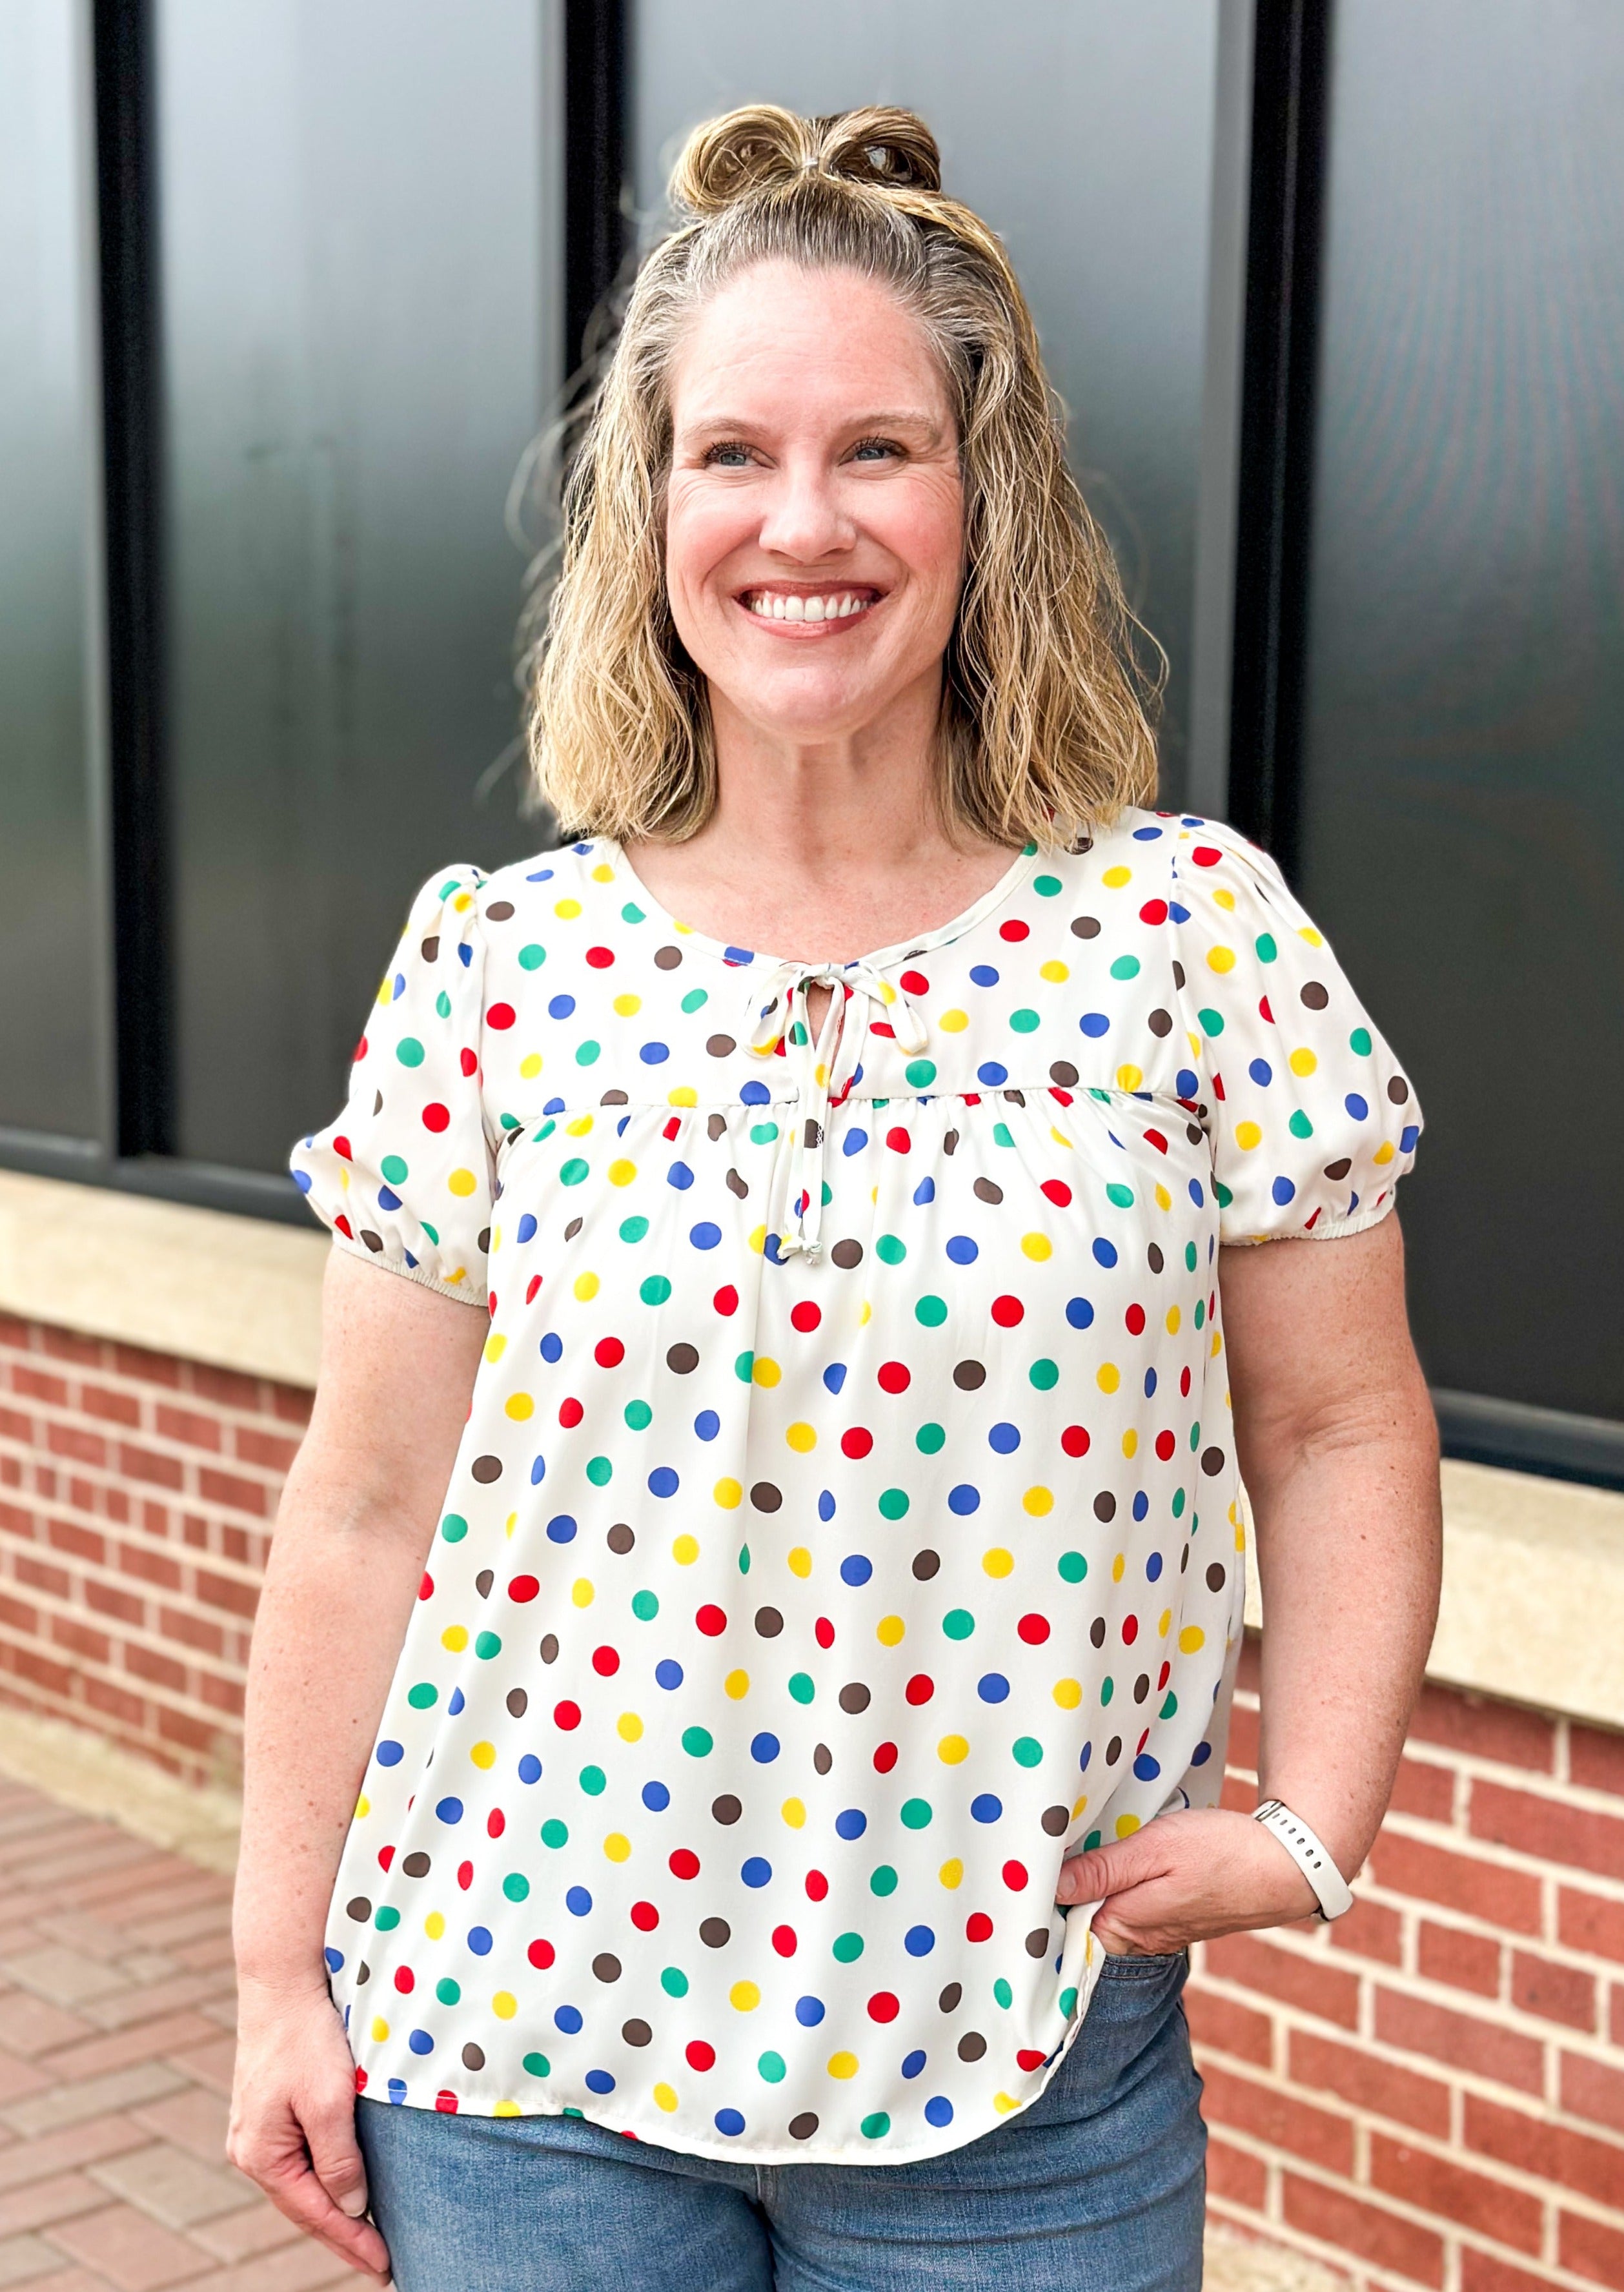 Polka dot print on off white short sleeve top - dots are black, yellow, red, blue and green - tie neck